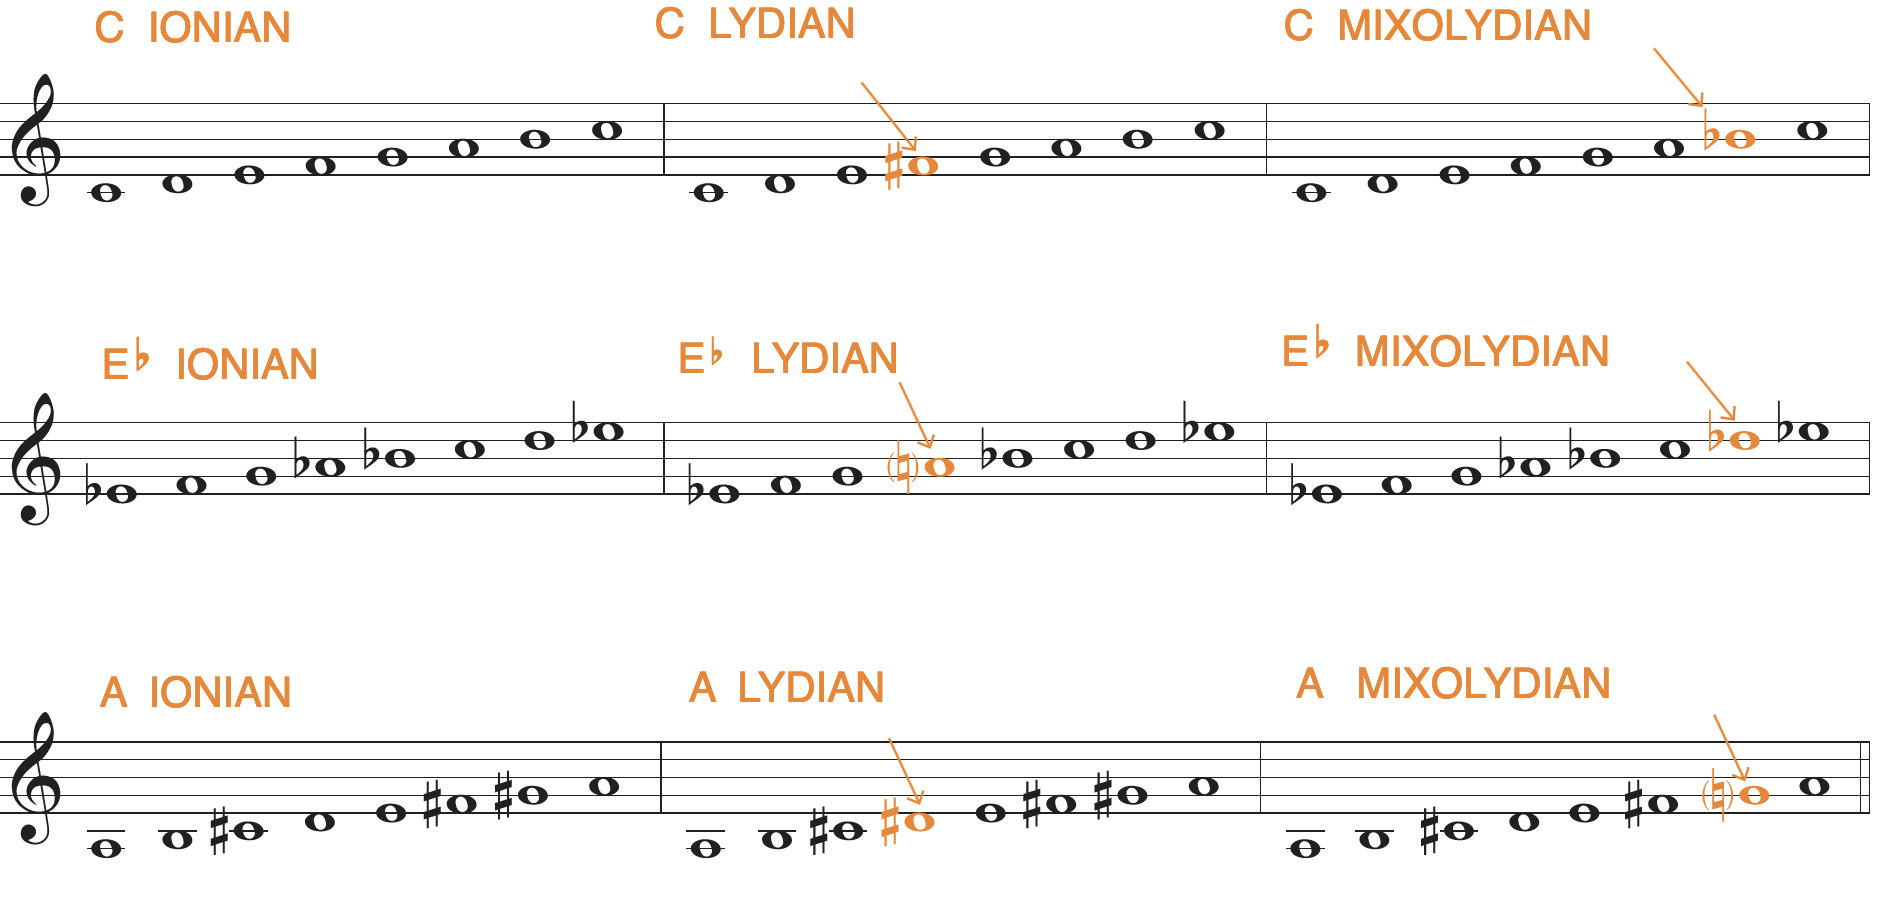 The Ionian, Lydian, and Mixolydian scales each have major 3rds.